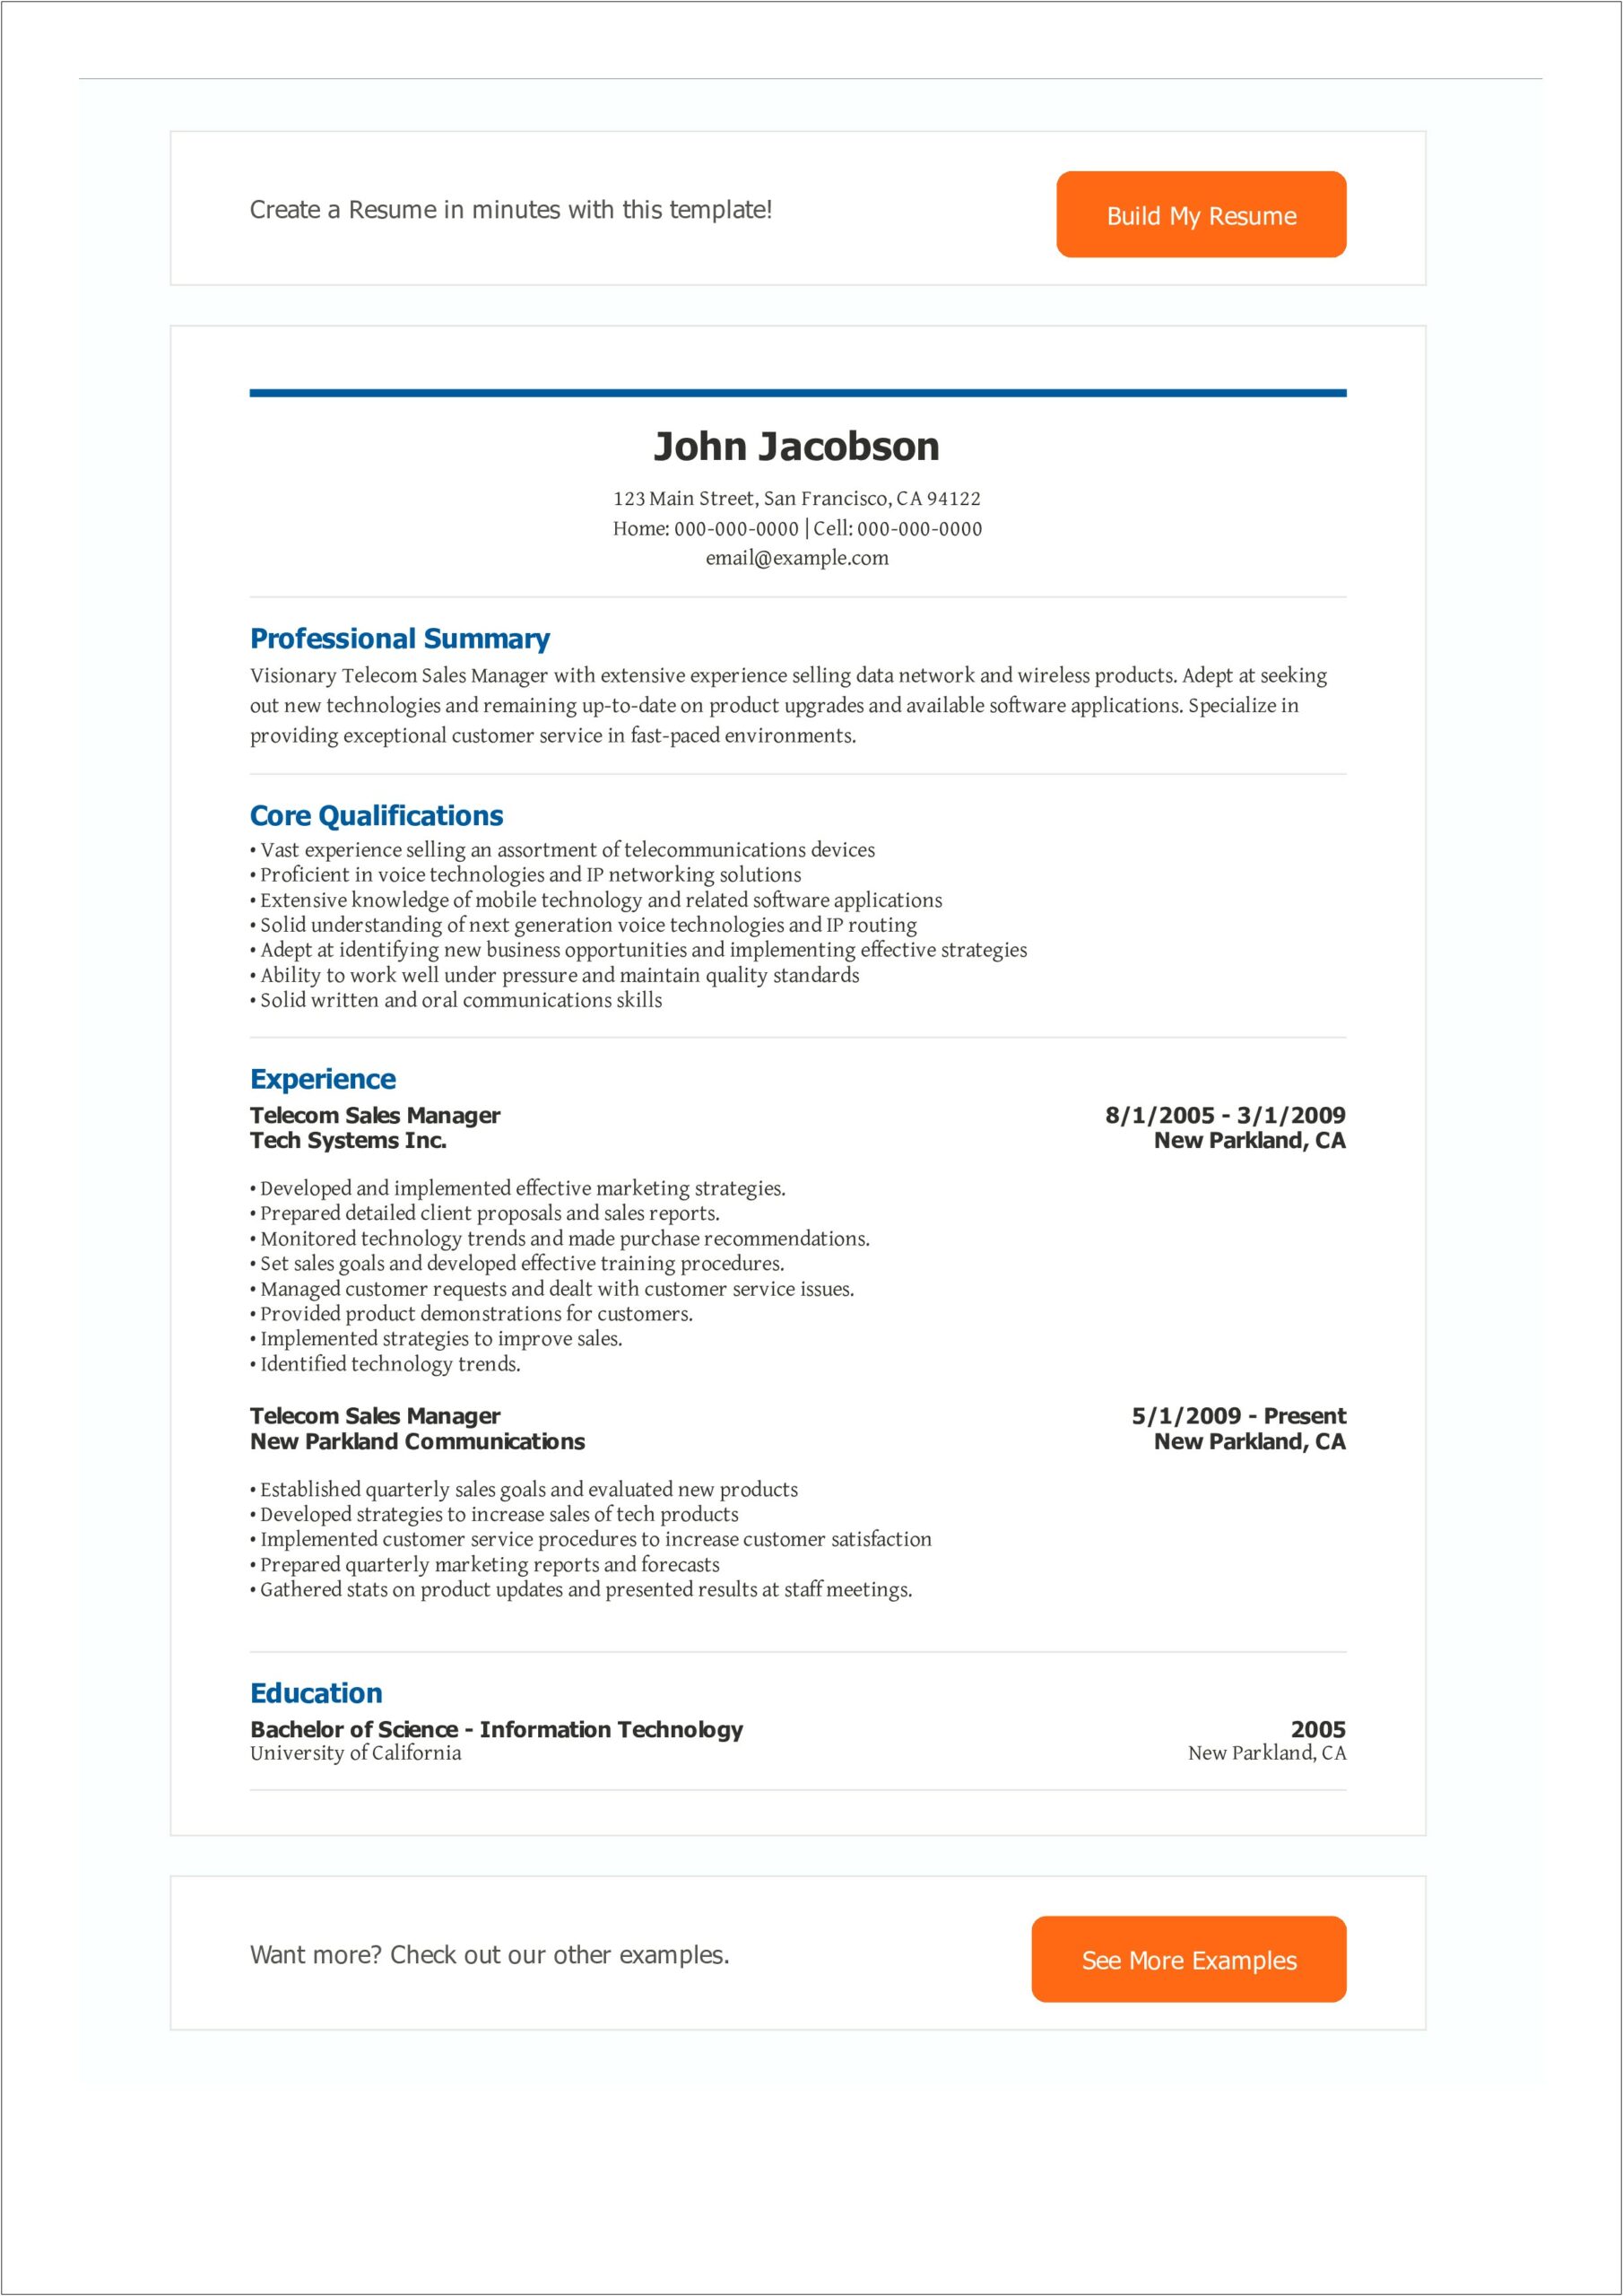 Resume Format For 1 Year Experience In Telecom